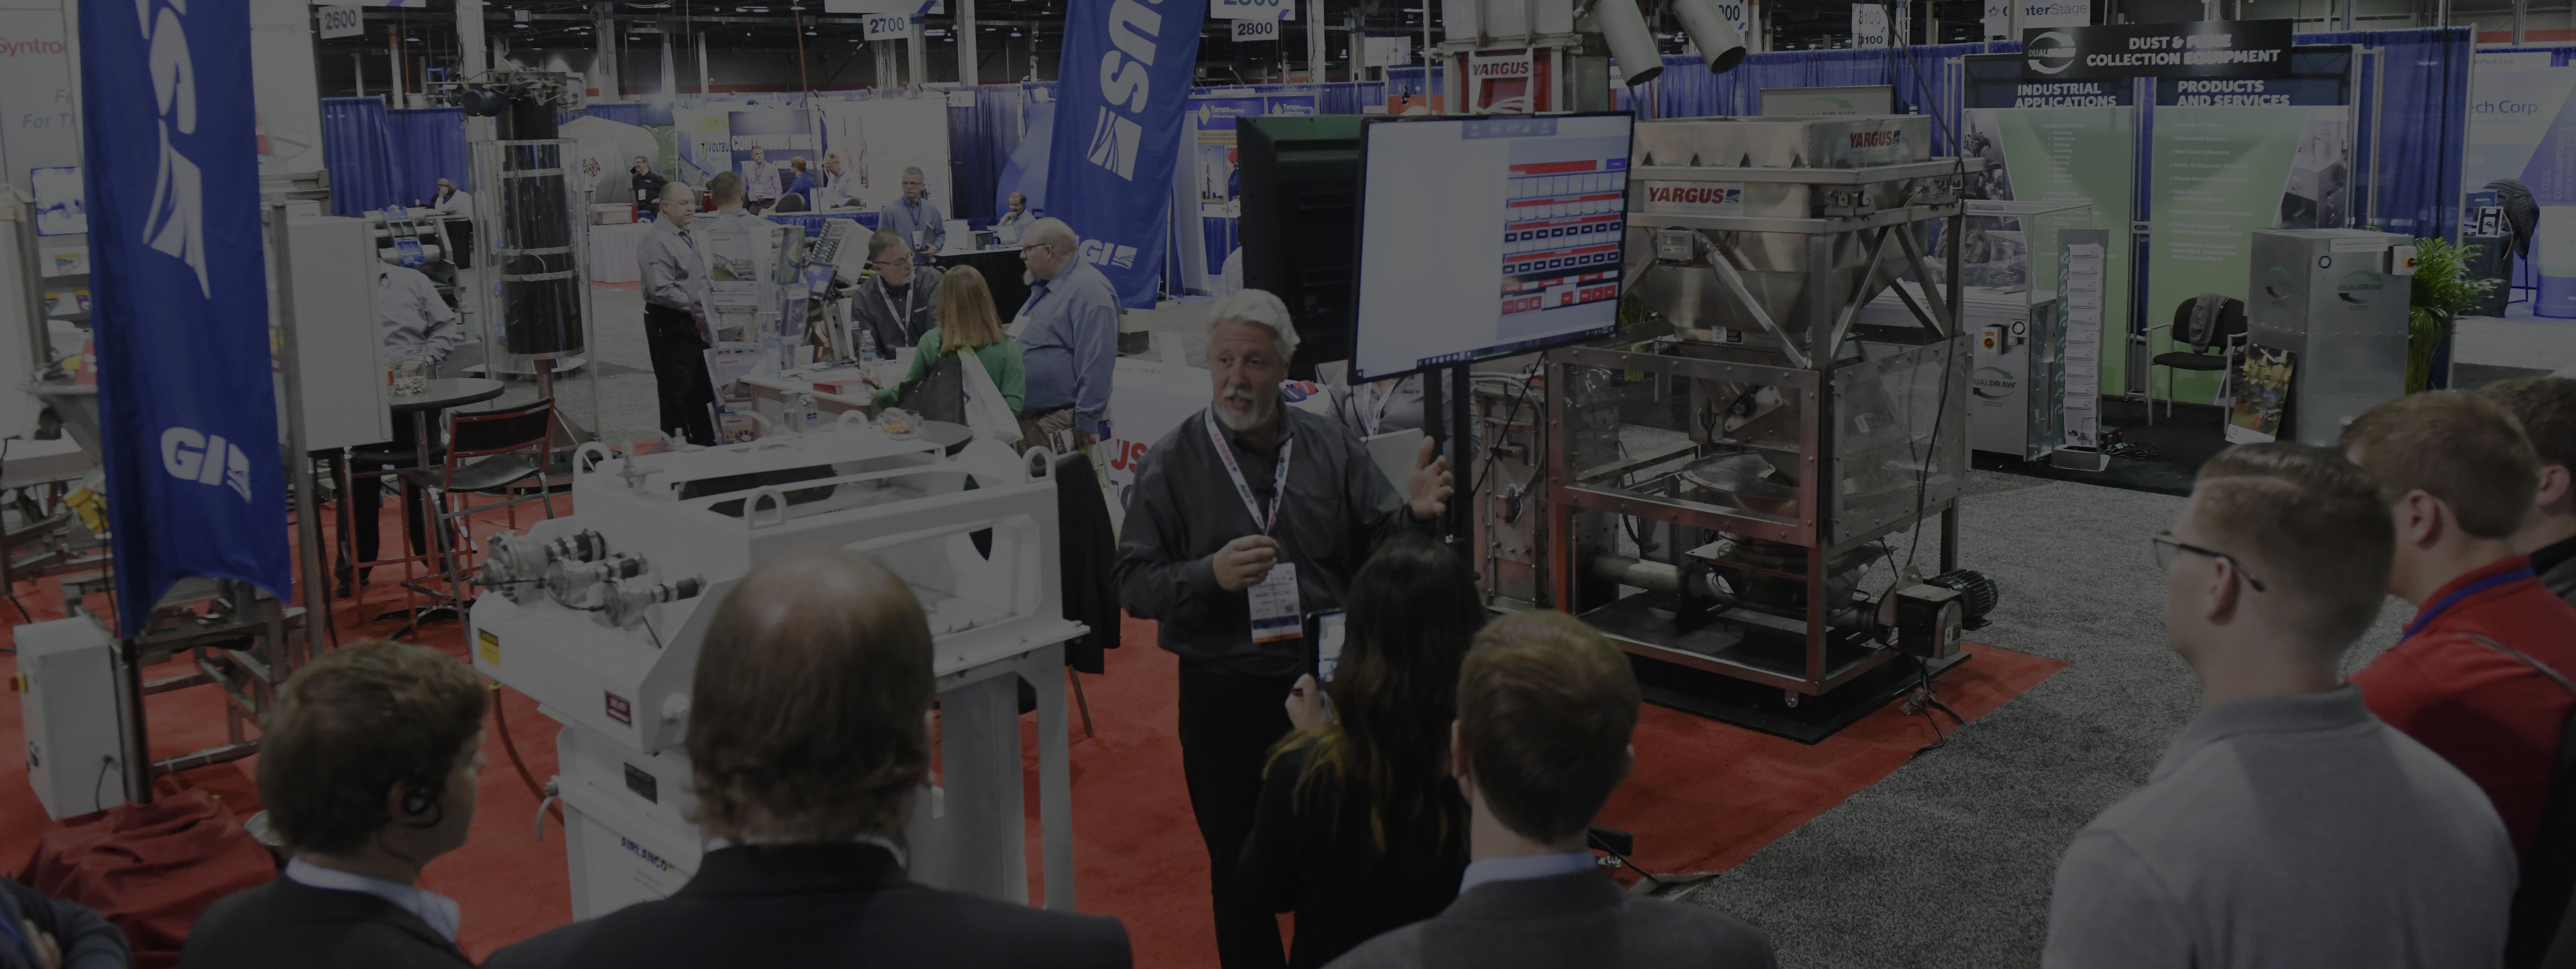 Exhibitor giving a demo of processing machines to expo hall crowd